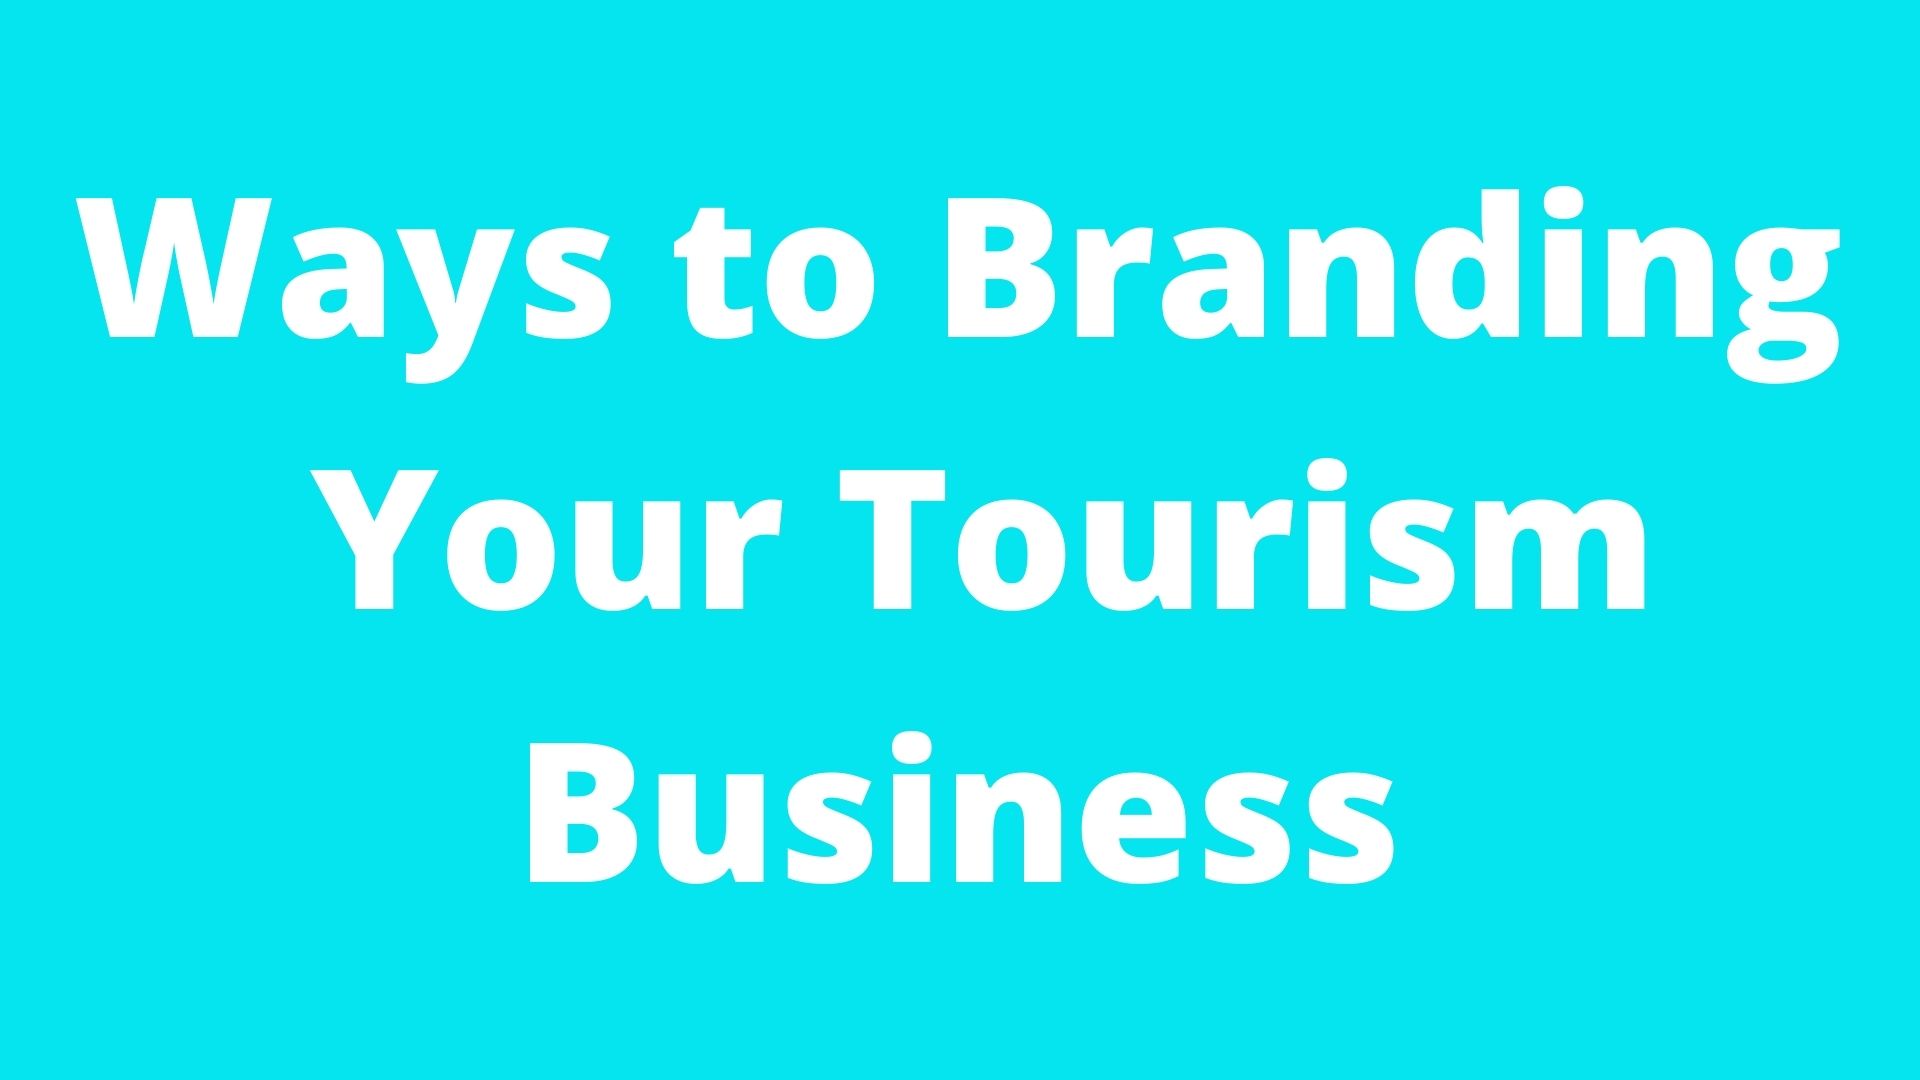 Branding Your Tourism Business